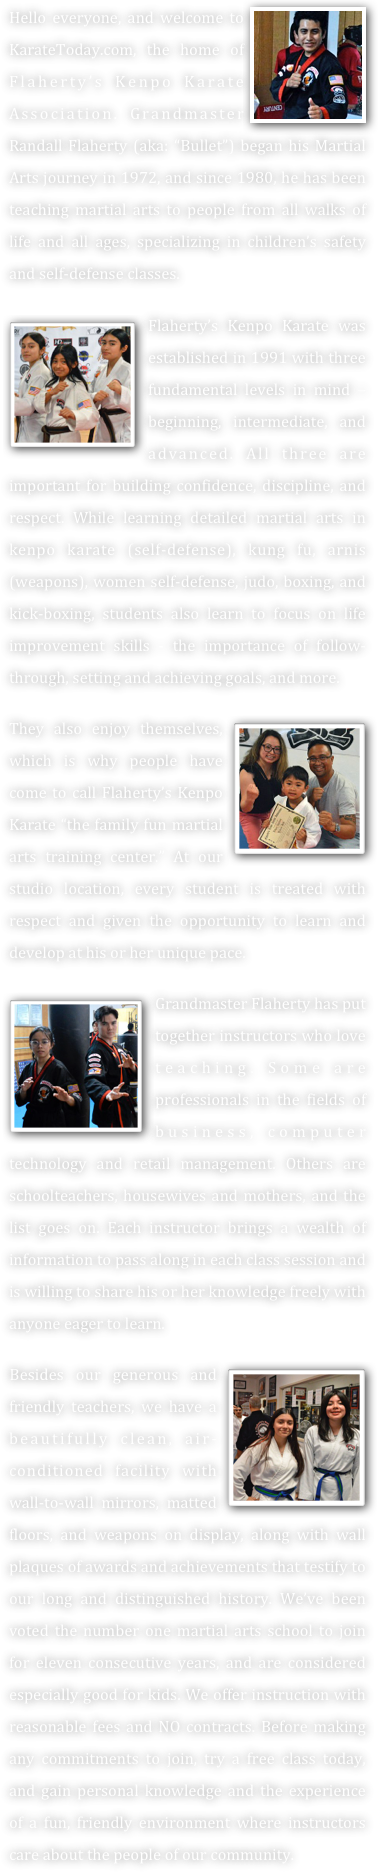 Low Starter Rates
     



Consider Us...

 Terrific Prices
 Great for Children 
    (ages: 5 & Up)
 Classes for Teens & Adults
 No Contracts
 Free Starter Uniform
 Up to One Free Month
 Over 40 years Experience
 Grandmaster Instruction
 Ultimate in Self-defense
 Friendly Environment
 Knowledgeable Teachers
 Excellent Student Mentors
 Certified in Child Psychology.
 Martial Arts Hall of Fame inductees (A-List Recipients).







2015 KCRA 3 A-List Reports:
“Voters Love
Flaherty’s Kenpo Karate.”

Ranked in the top “5” Schools out of 106 for Best Martial Arts.

 Best of San Joaquin
 Best of the Bay
 Parent Magazine
   (Voted Us: Good for kids)








 On Saturday, June 29, 2019, Grandmaster Flaherty was selected as one of five martial artists to represent the entire state of California as an inducted member of the American Martial Arts Alliance, Who’s Really Who in the Martial Arts, and as one of the authors of the Masters and Pioneers Autobiography book.






 On Saturday, January 25, 2020 Grandmaster Randall Flaherty was inducted into the Action Martial Arts Magazine Hall of Honors. He was one of only five people worldwide chosen to receive the “Distinguished Renowned Martial Artist” award. He was also selected to author a brief autobiography for the 2020 Martial Arts History Book and Directory.

 The Academy received Best of 2022: Stockton Awards (Business Hall of Fame) for 11 consecutive years. (Martial Arts Training)